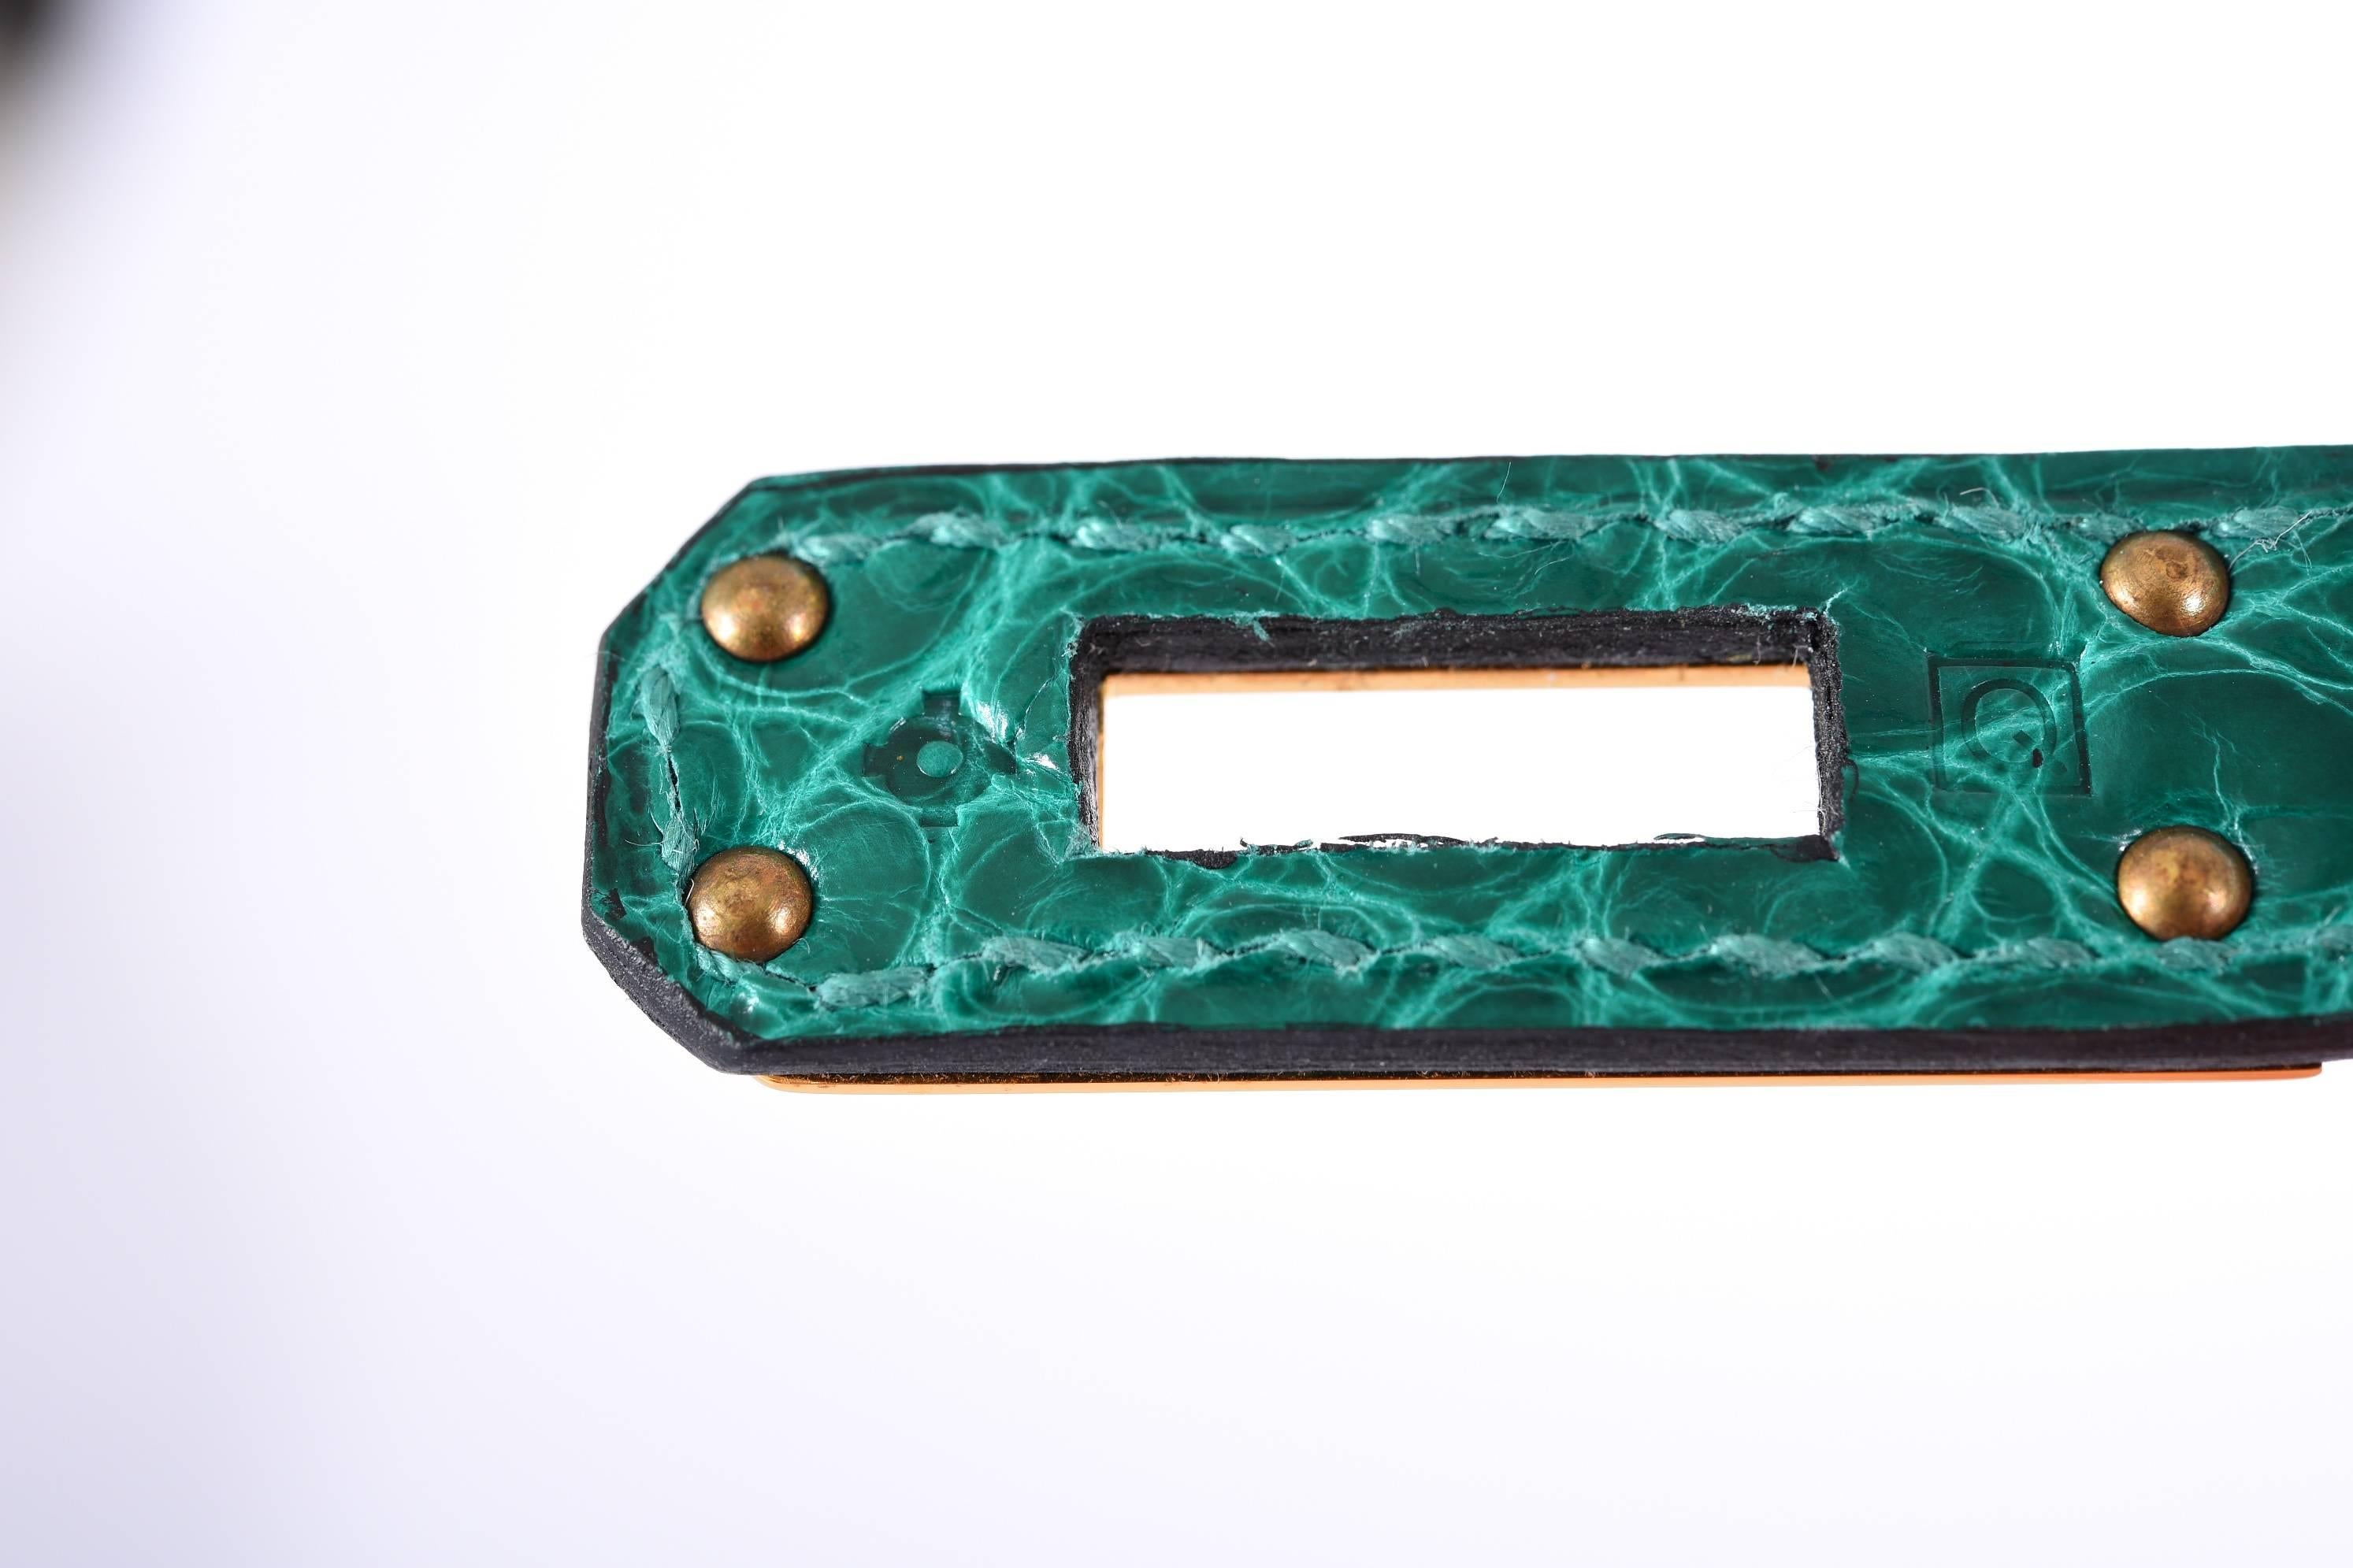 Hermes Kelly Pochette Clutch Vert Emerald Alligator Gold Hardware

Prisitine Condition

Hardware: Gold
Country of Origin: France
Color: Emerald 
Closure: Toggle
Handle Drop (in inches): 1
Height (in inches): 5.5
Width (in inches):